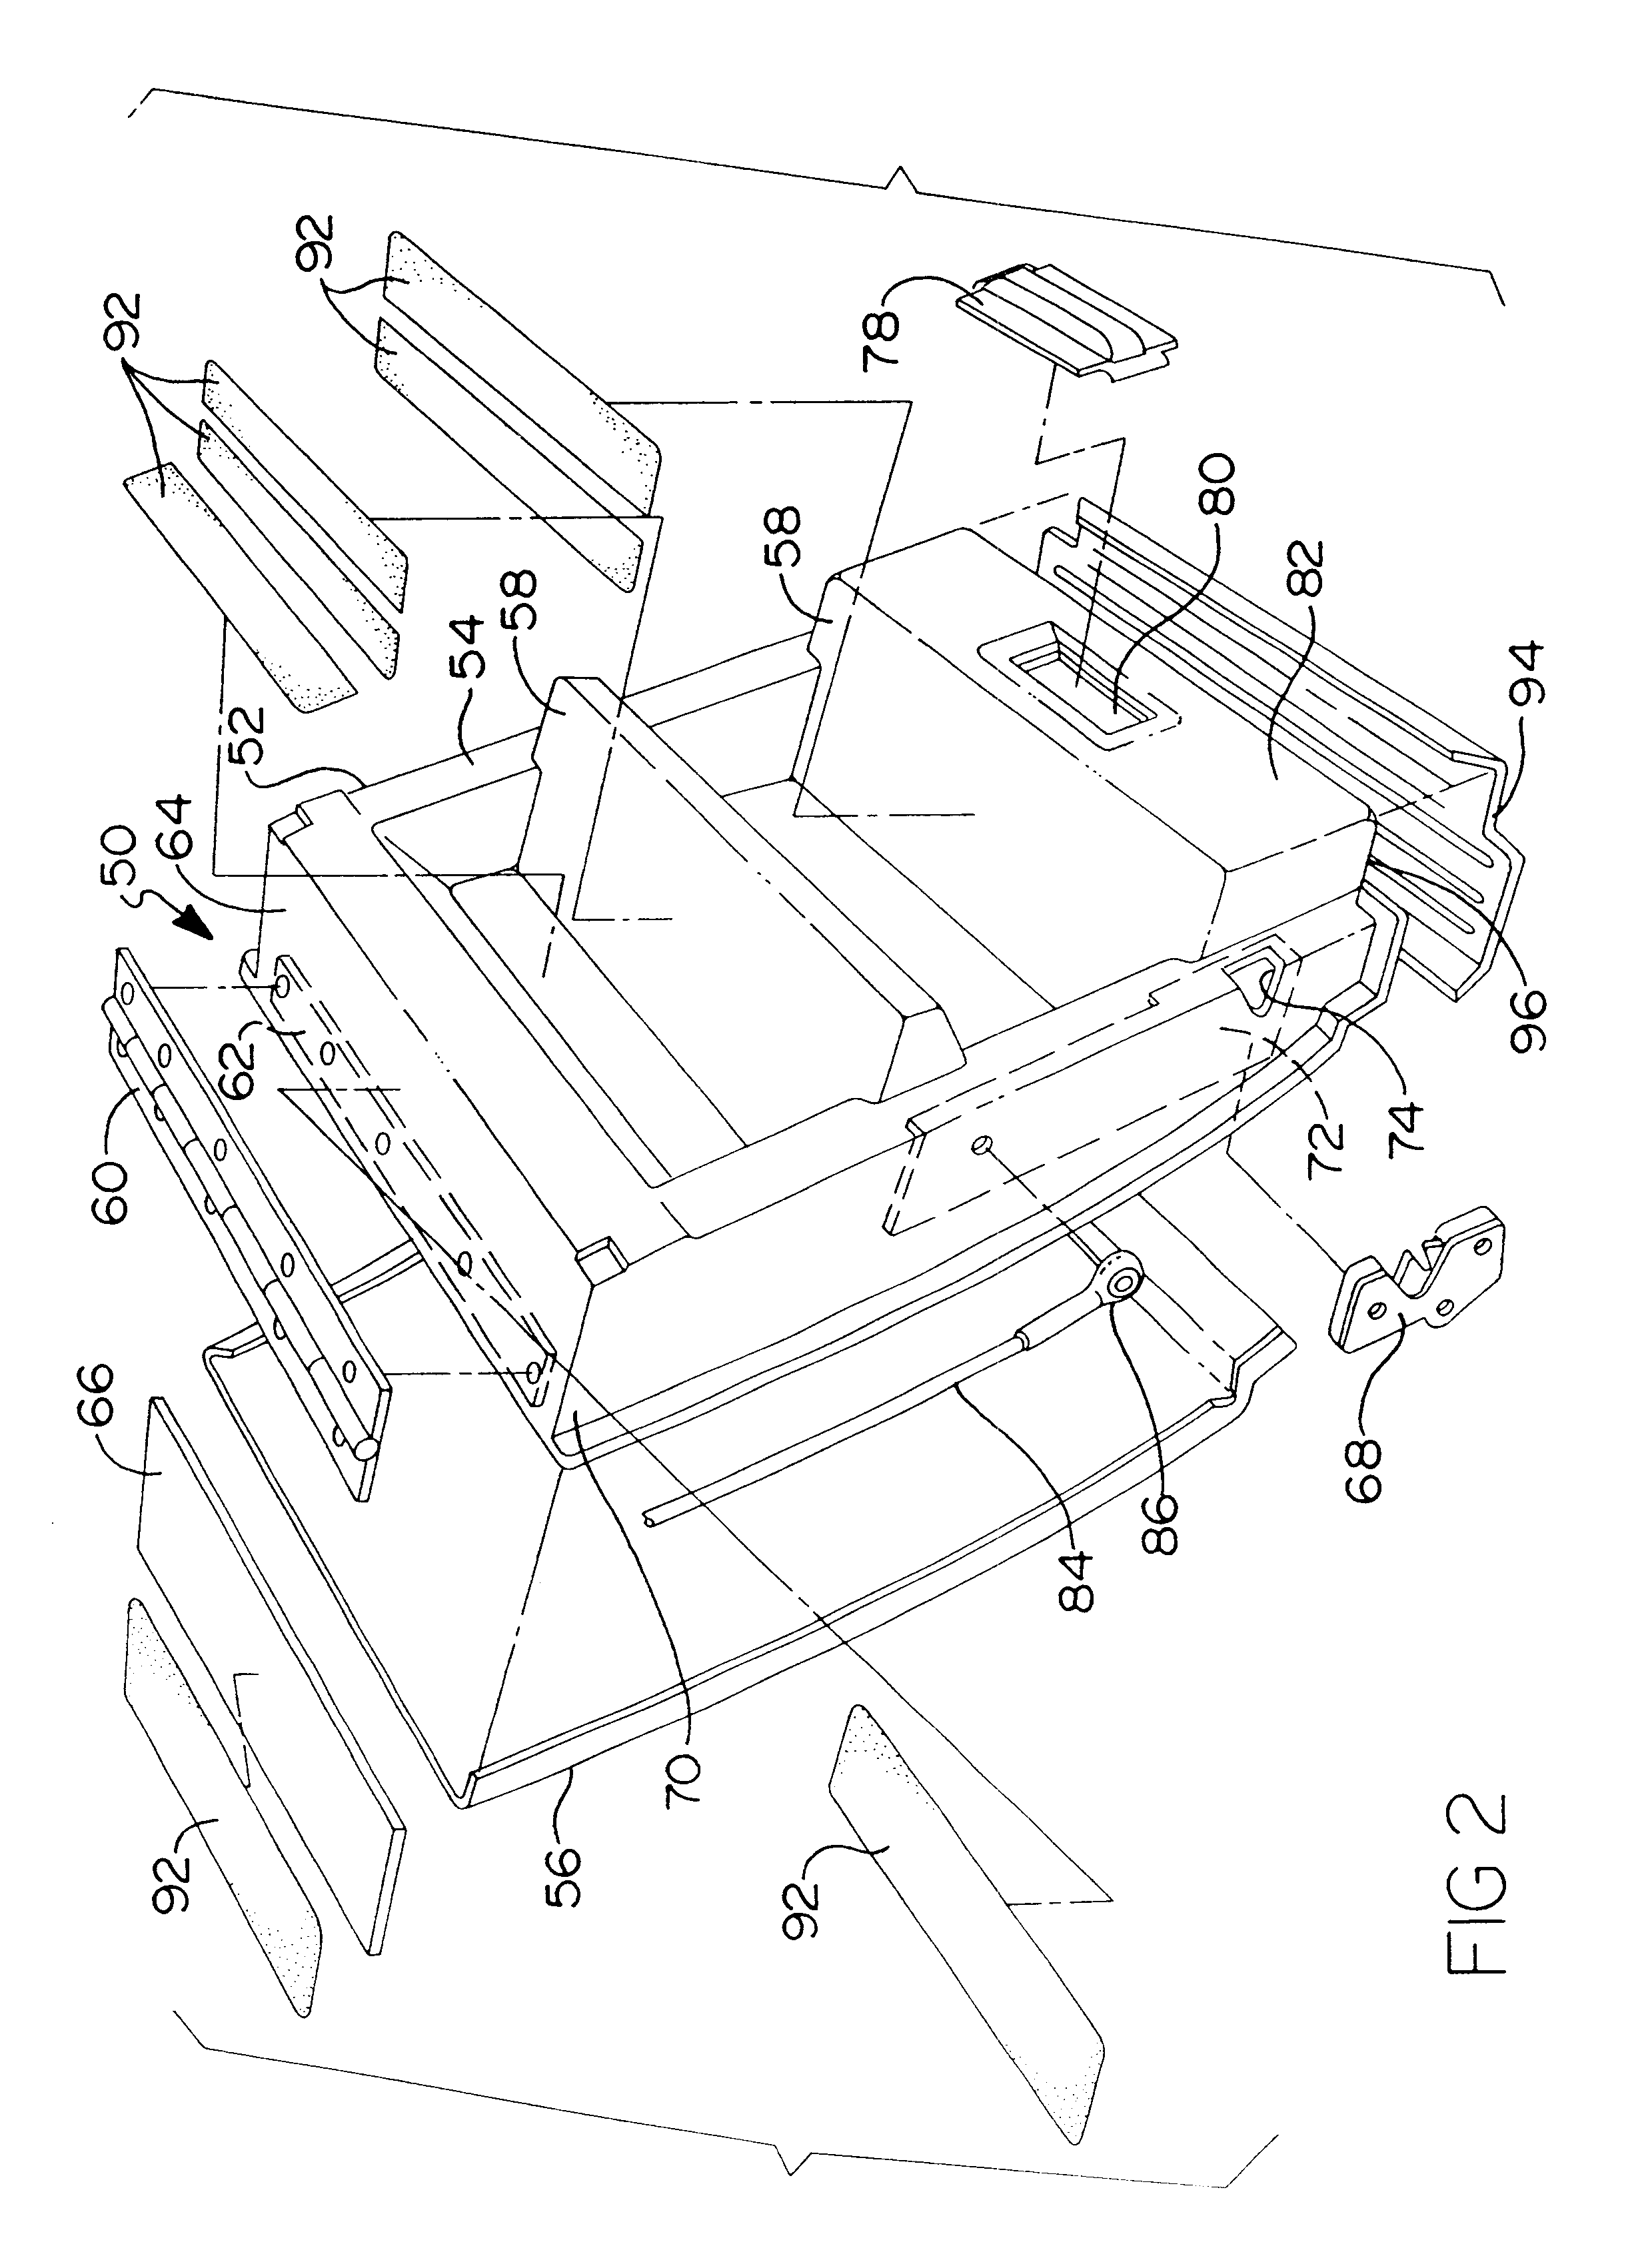 Integrated bed side step assembly for vehicles